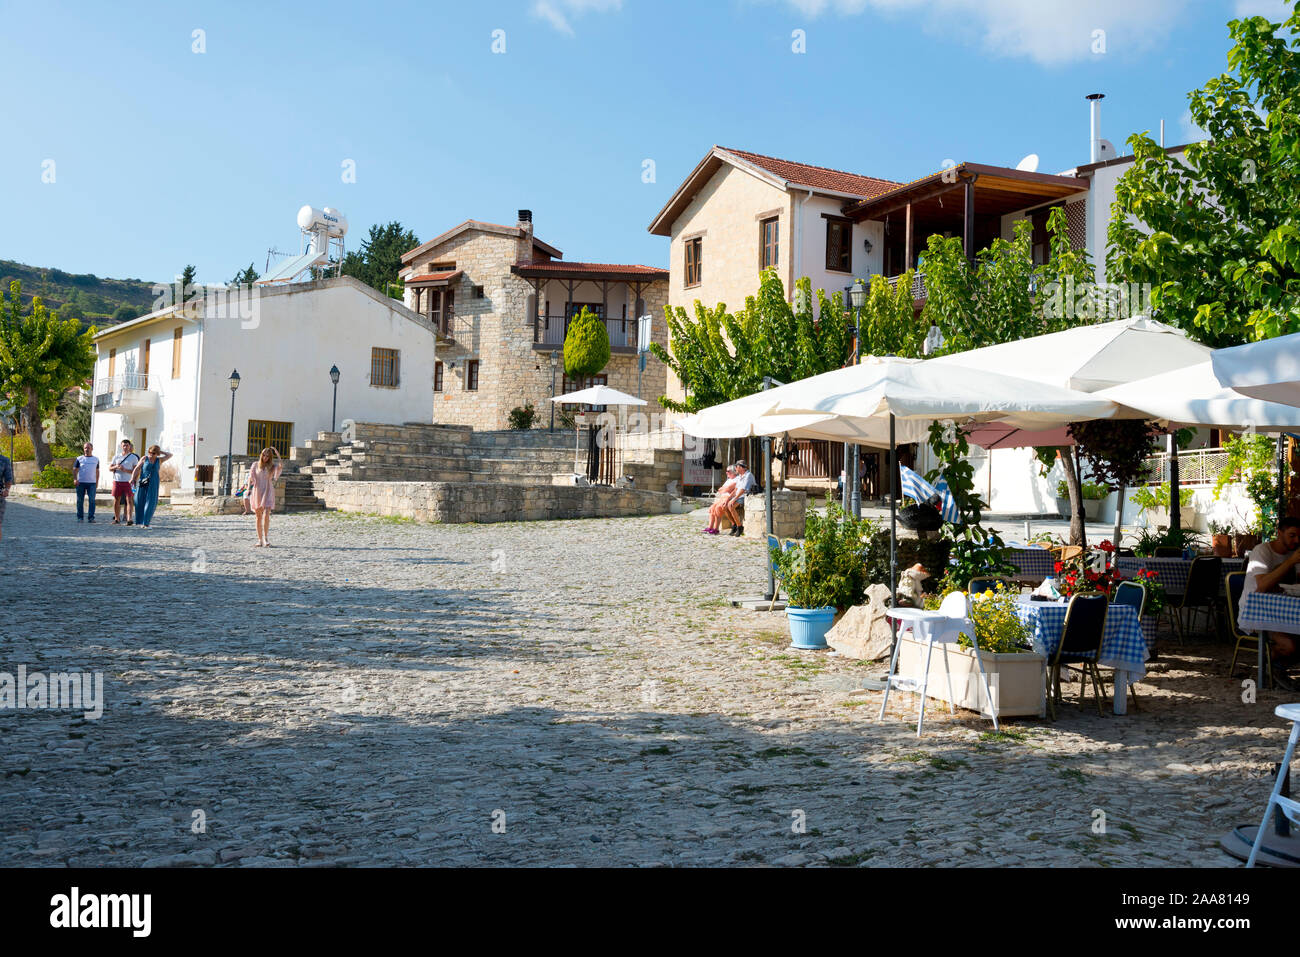 Cobbled streets in the  picturesque village of Omodos in the Troodos Mountains, Cyprus with whitewashed houses, narrow streets. Stock Photo